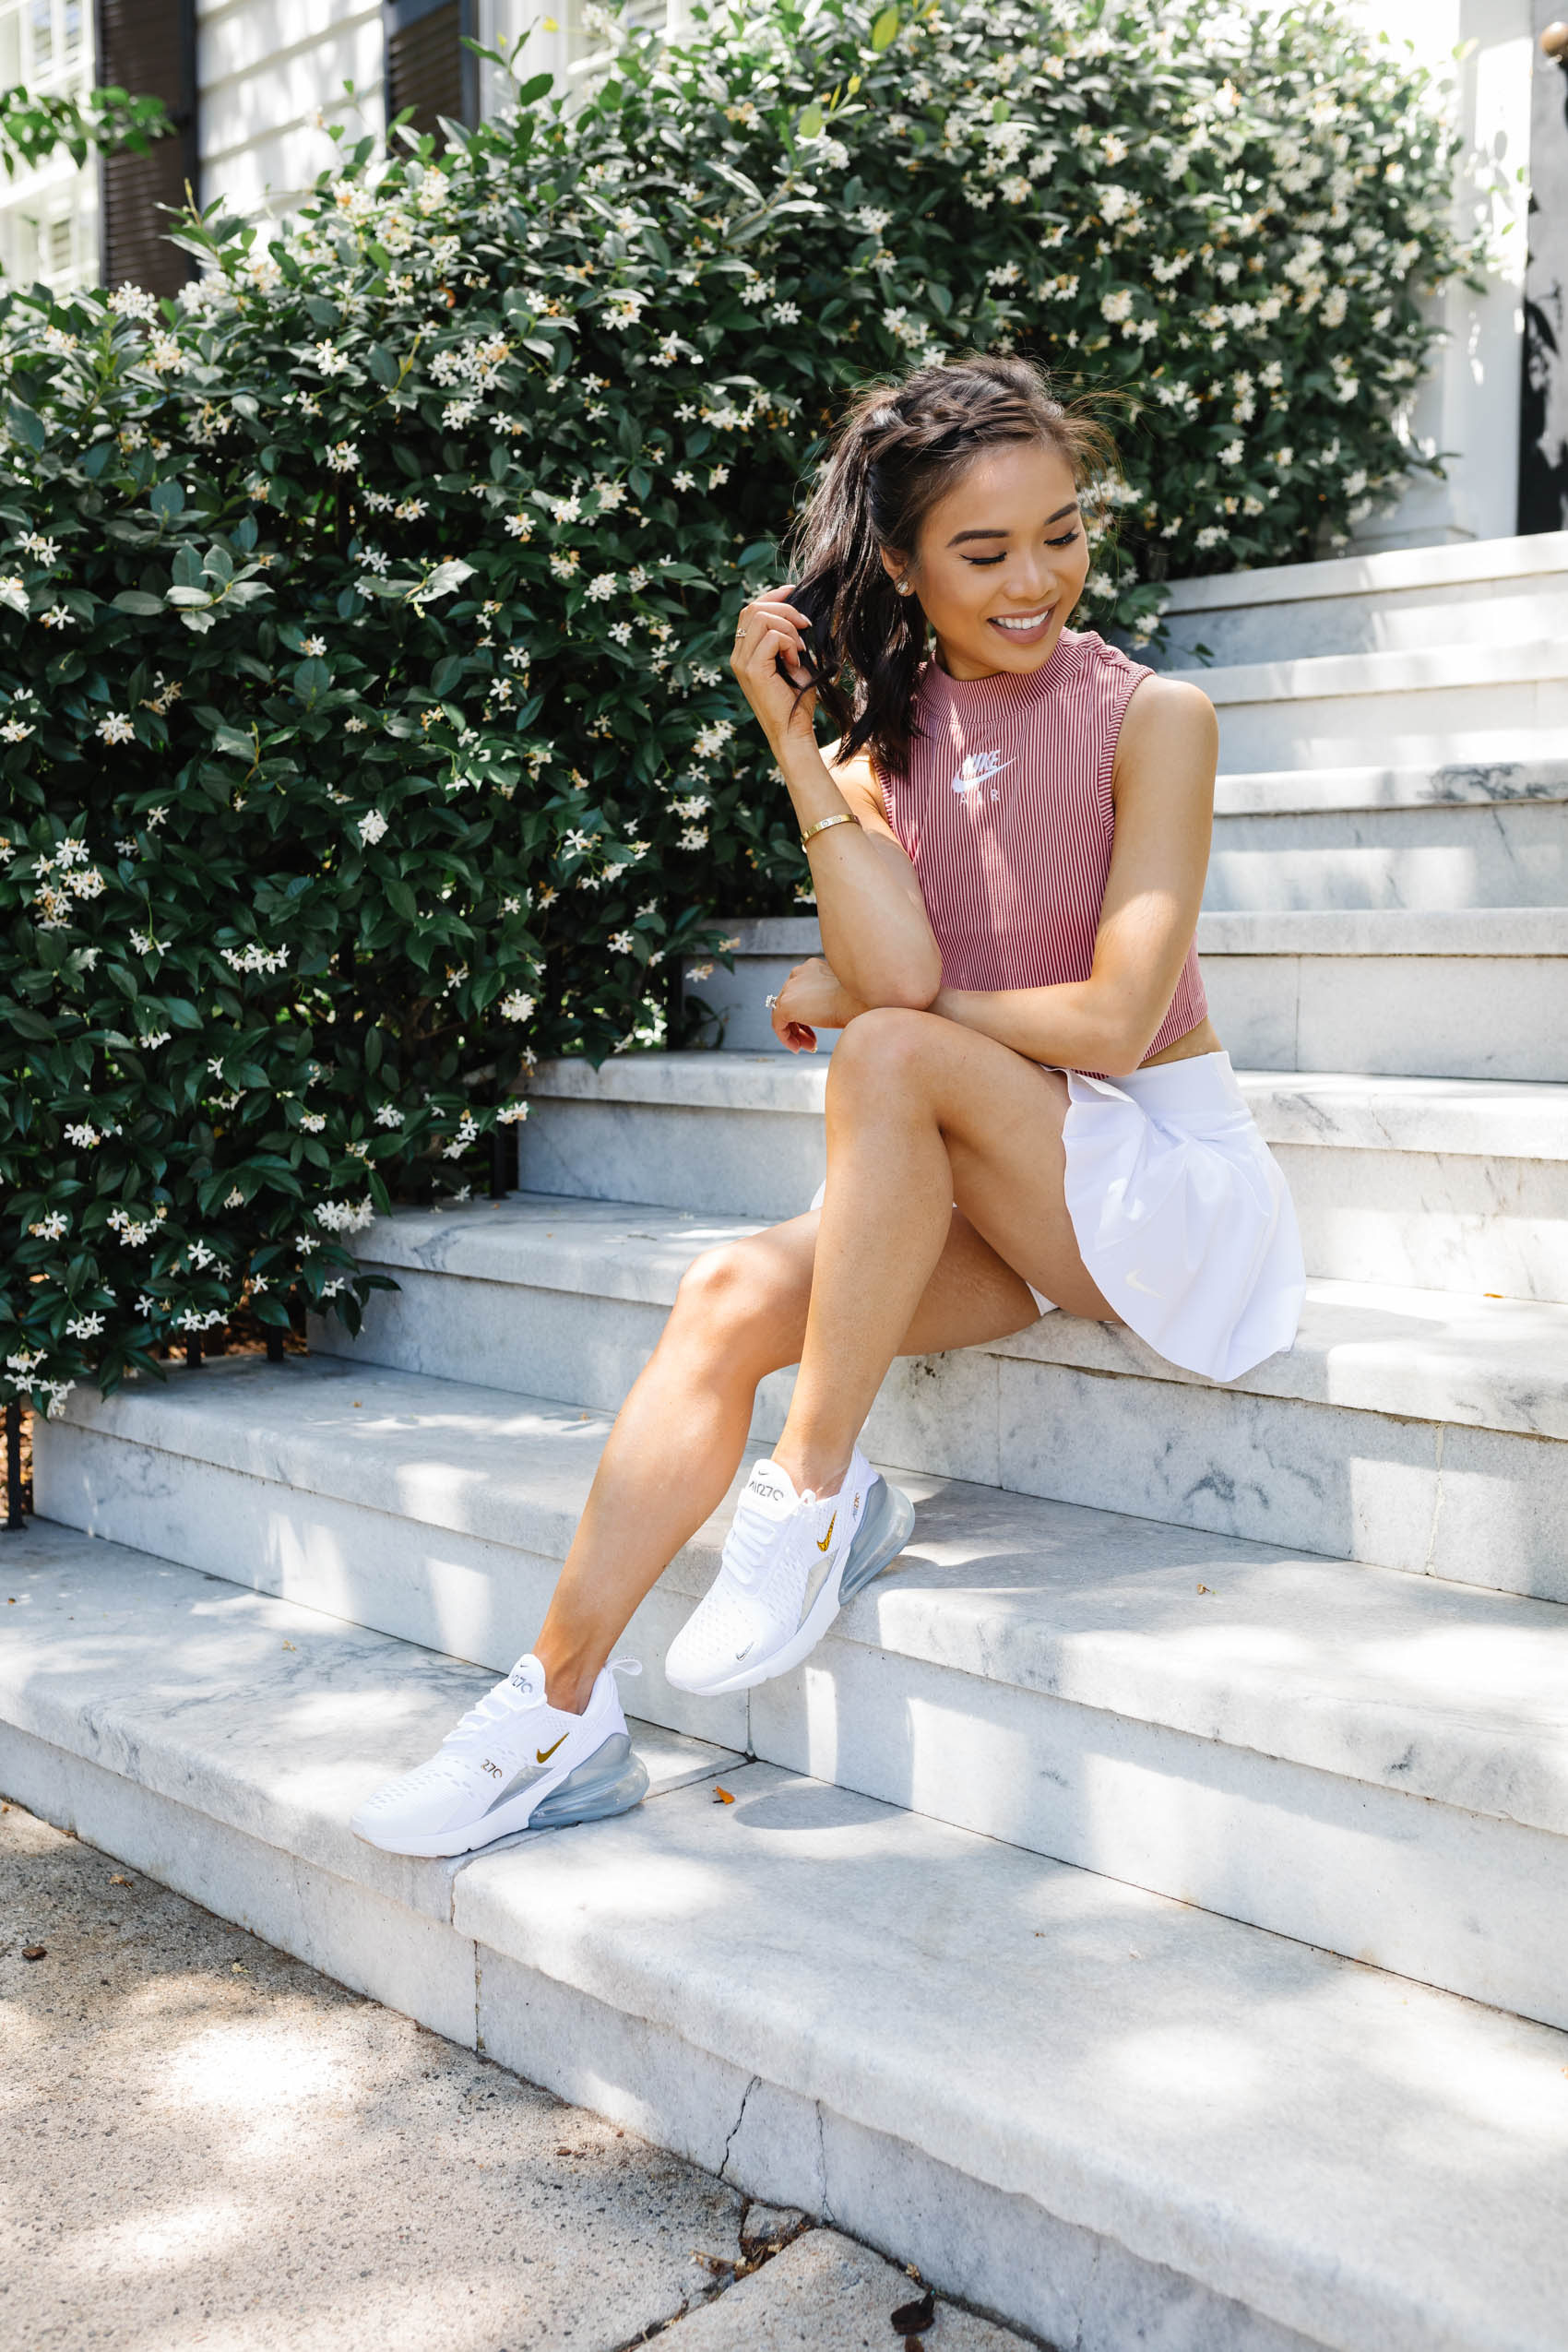 Why The Nike Air Max 270s Are My Sneakers - Color Chic